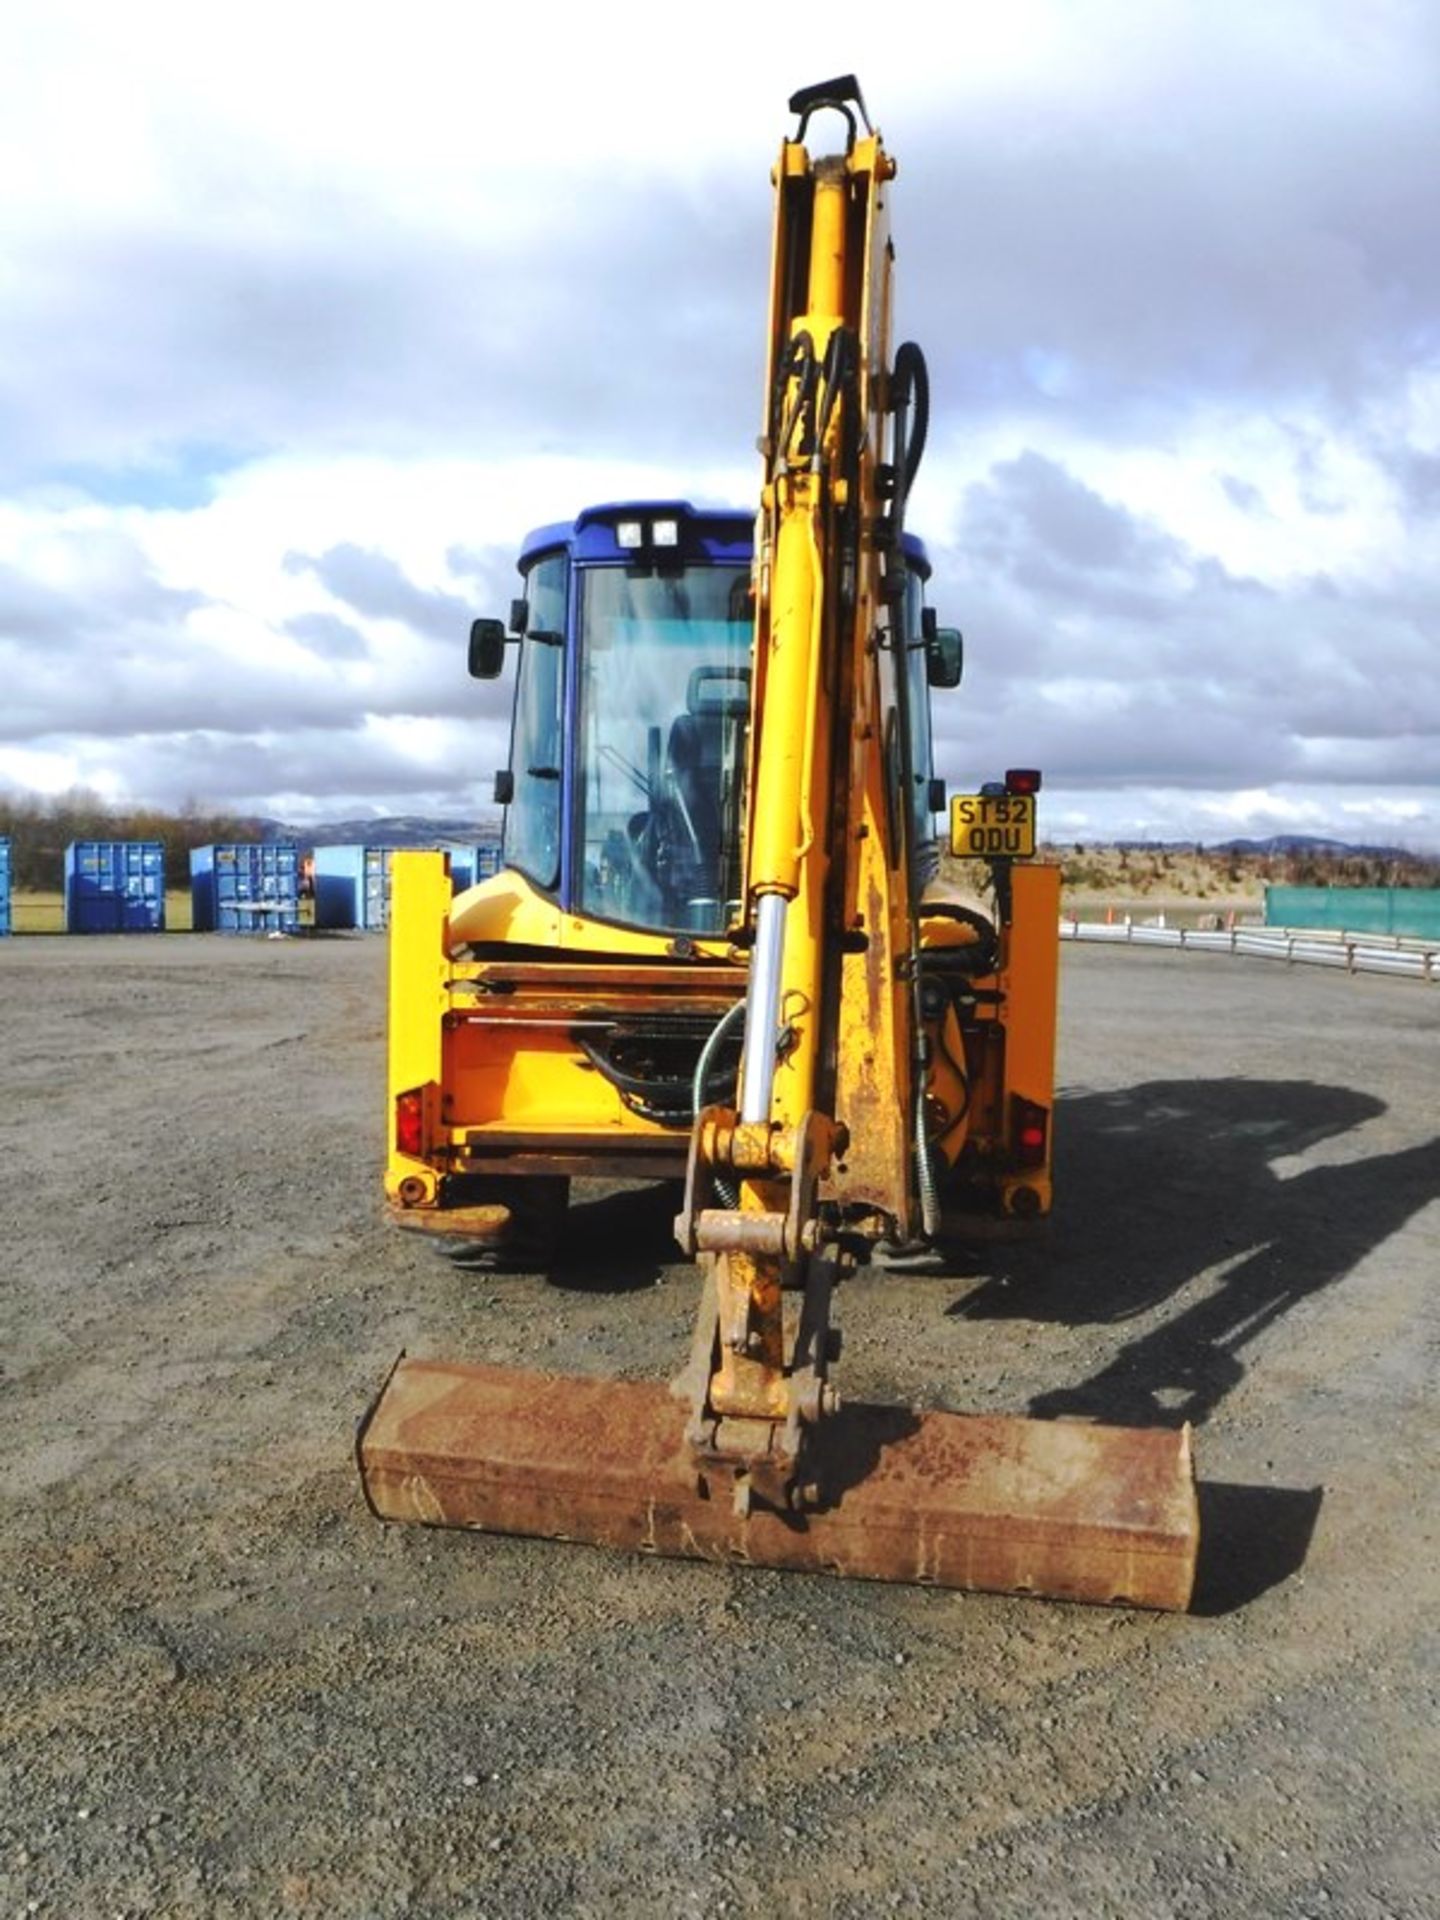 2002 JCB 3CX PLUS DIGGER. REG NO ST52 ODU. SN0934169. GVW (TONNES) 8076. NEW HOUR CLOCK FITTED RECEN - Image 15 of 18